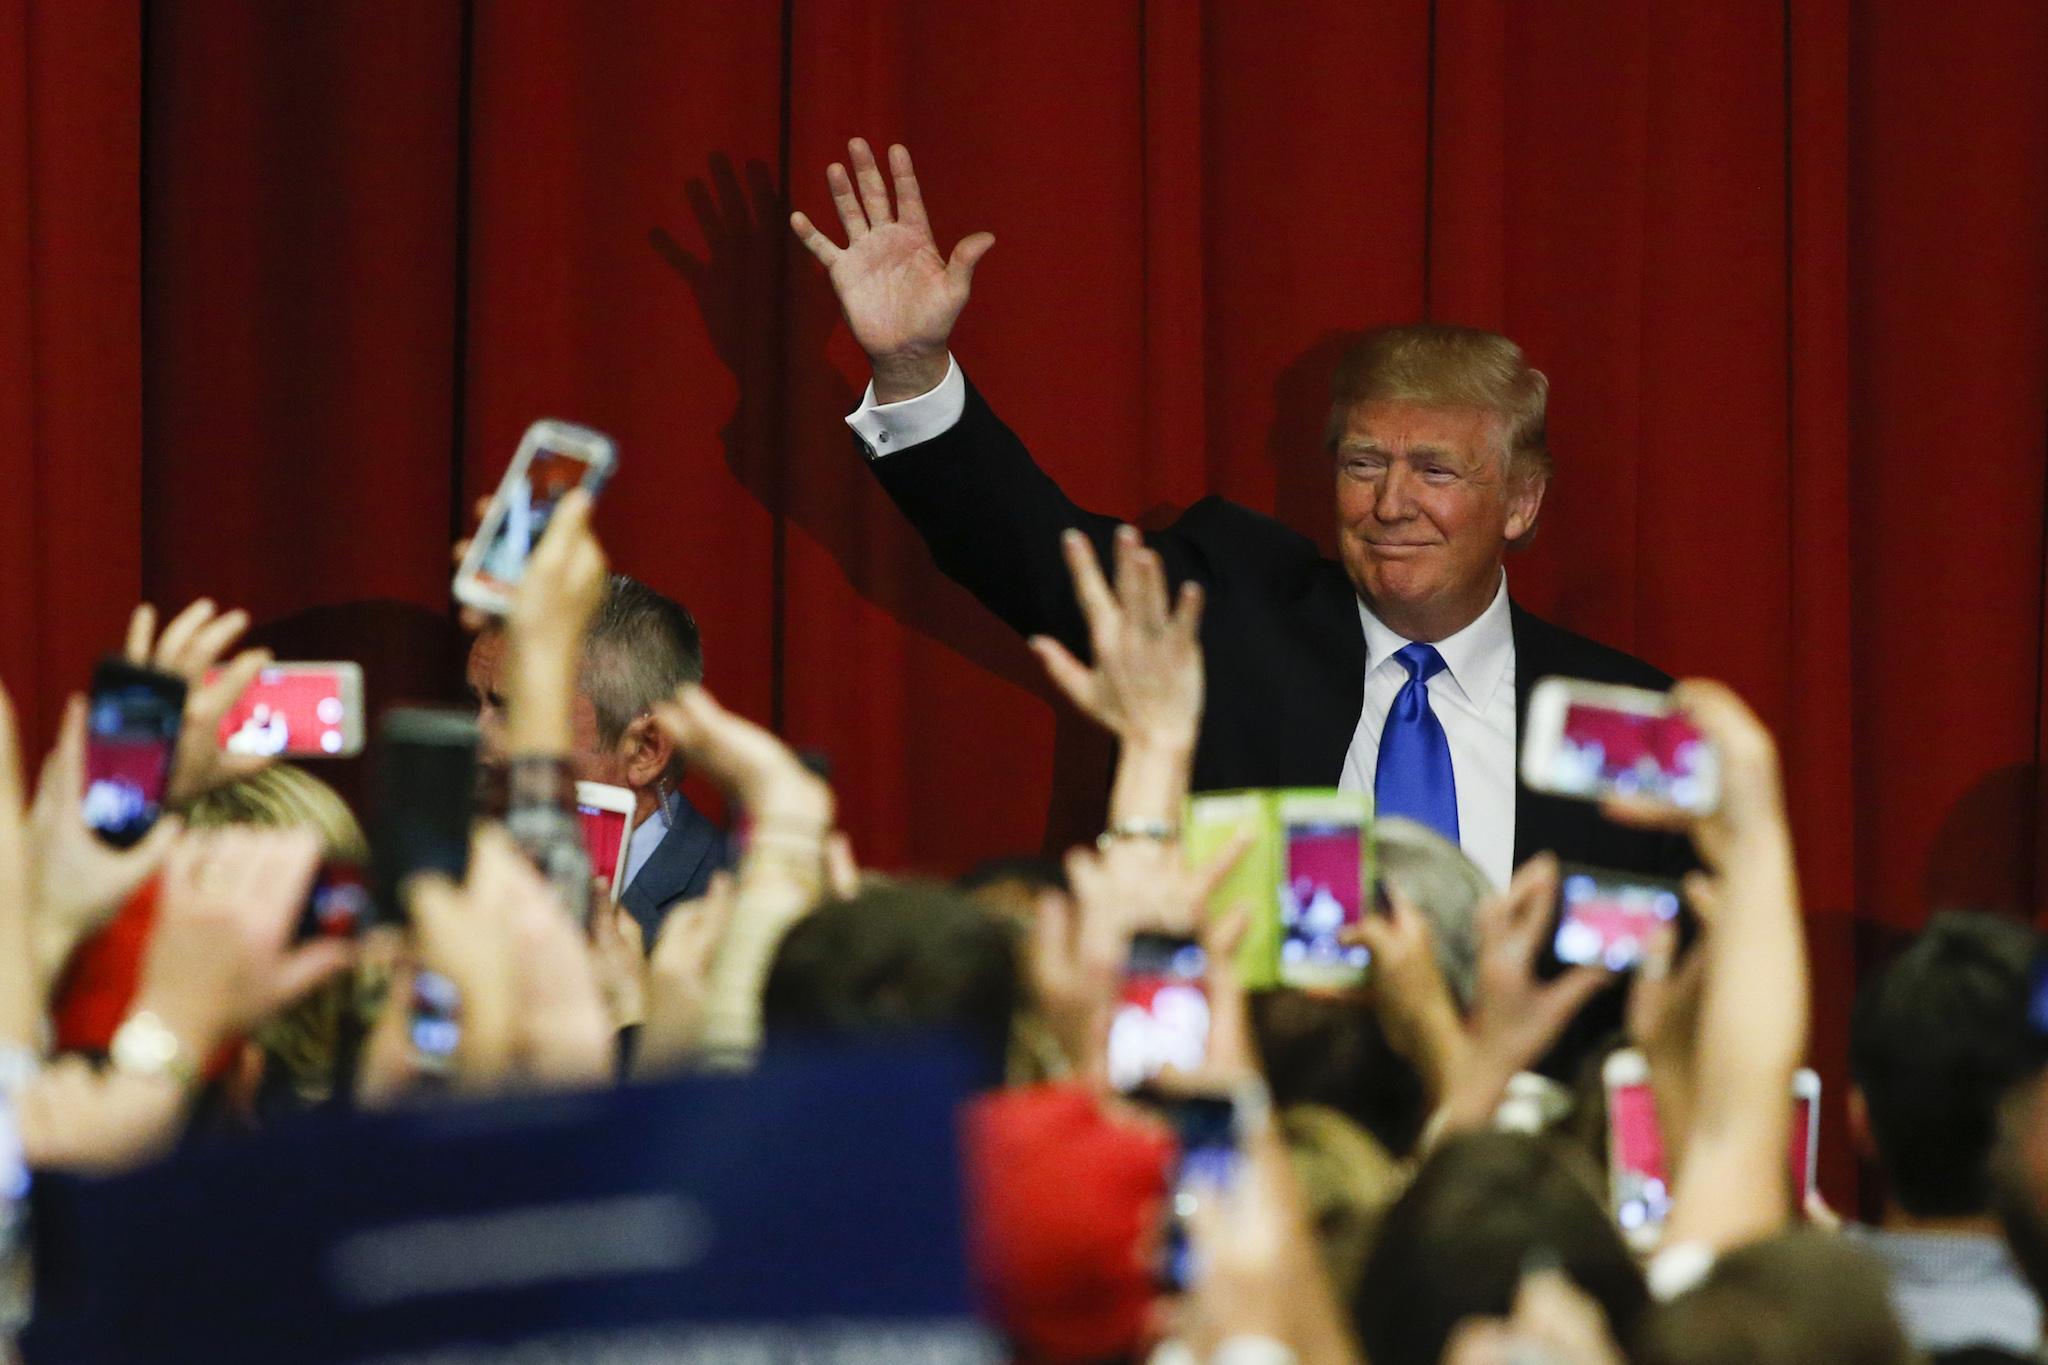 Republican presidential candidate Donald Trump waves to the crowd at a fundraising event in Lawrenceville, New Jersey on May 19, 2016